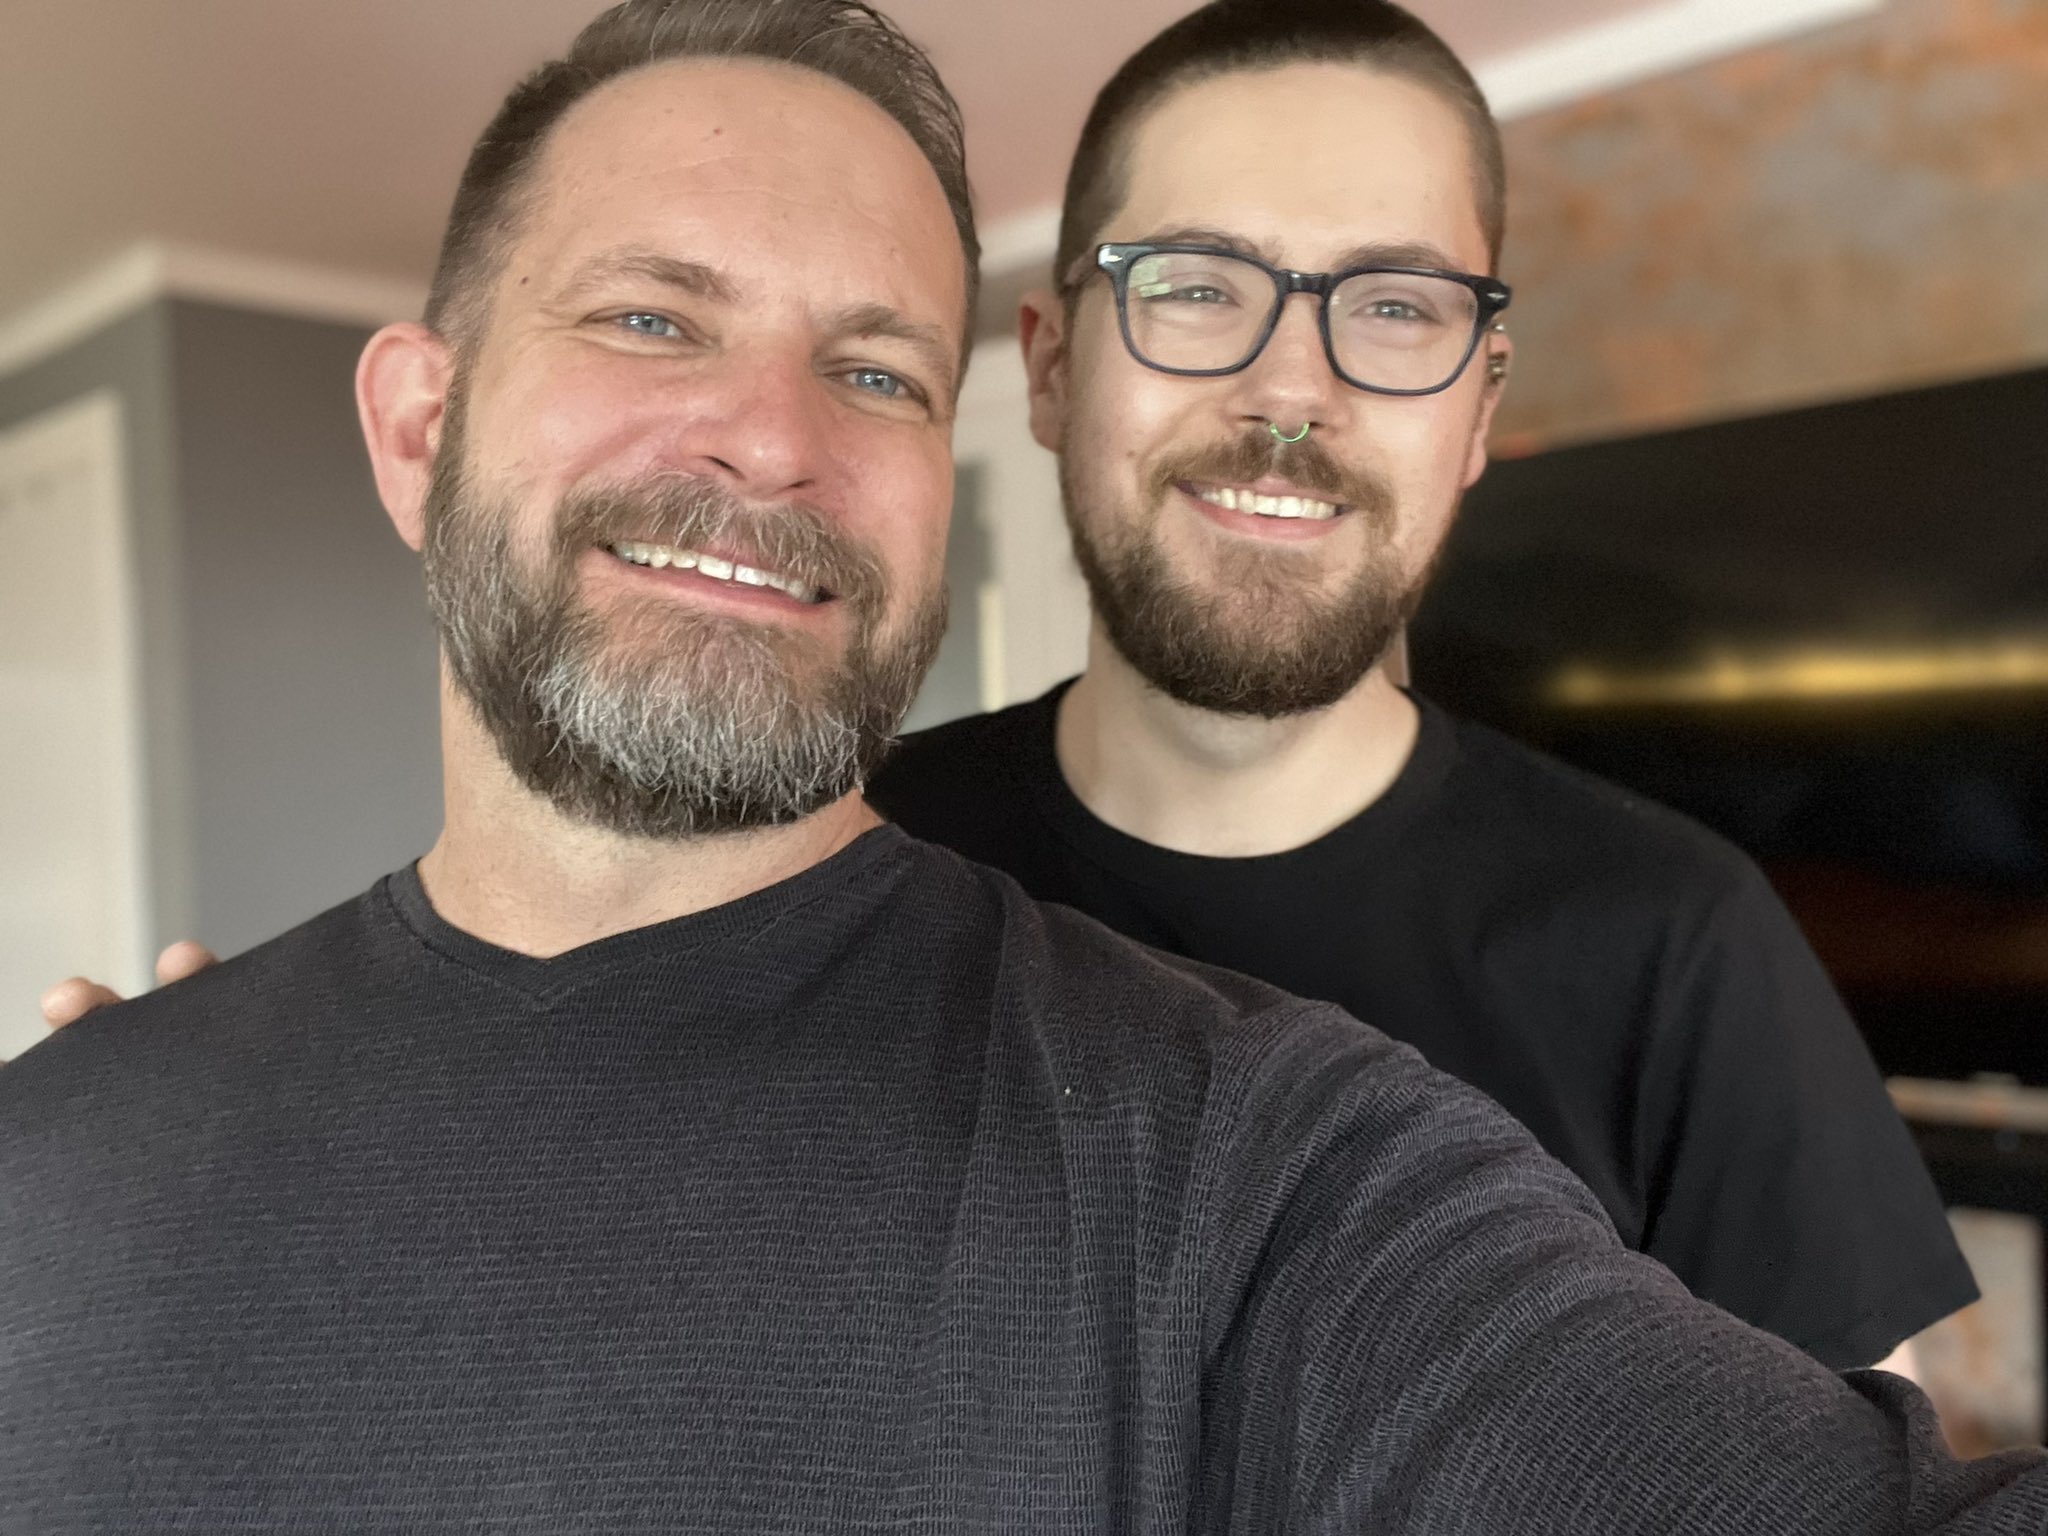 Tw Pornstars 1 Pic Seattle Dad Twitter New Verbal Dad Son Bonding Video Out Tomorrow With